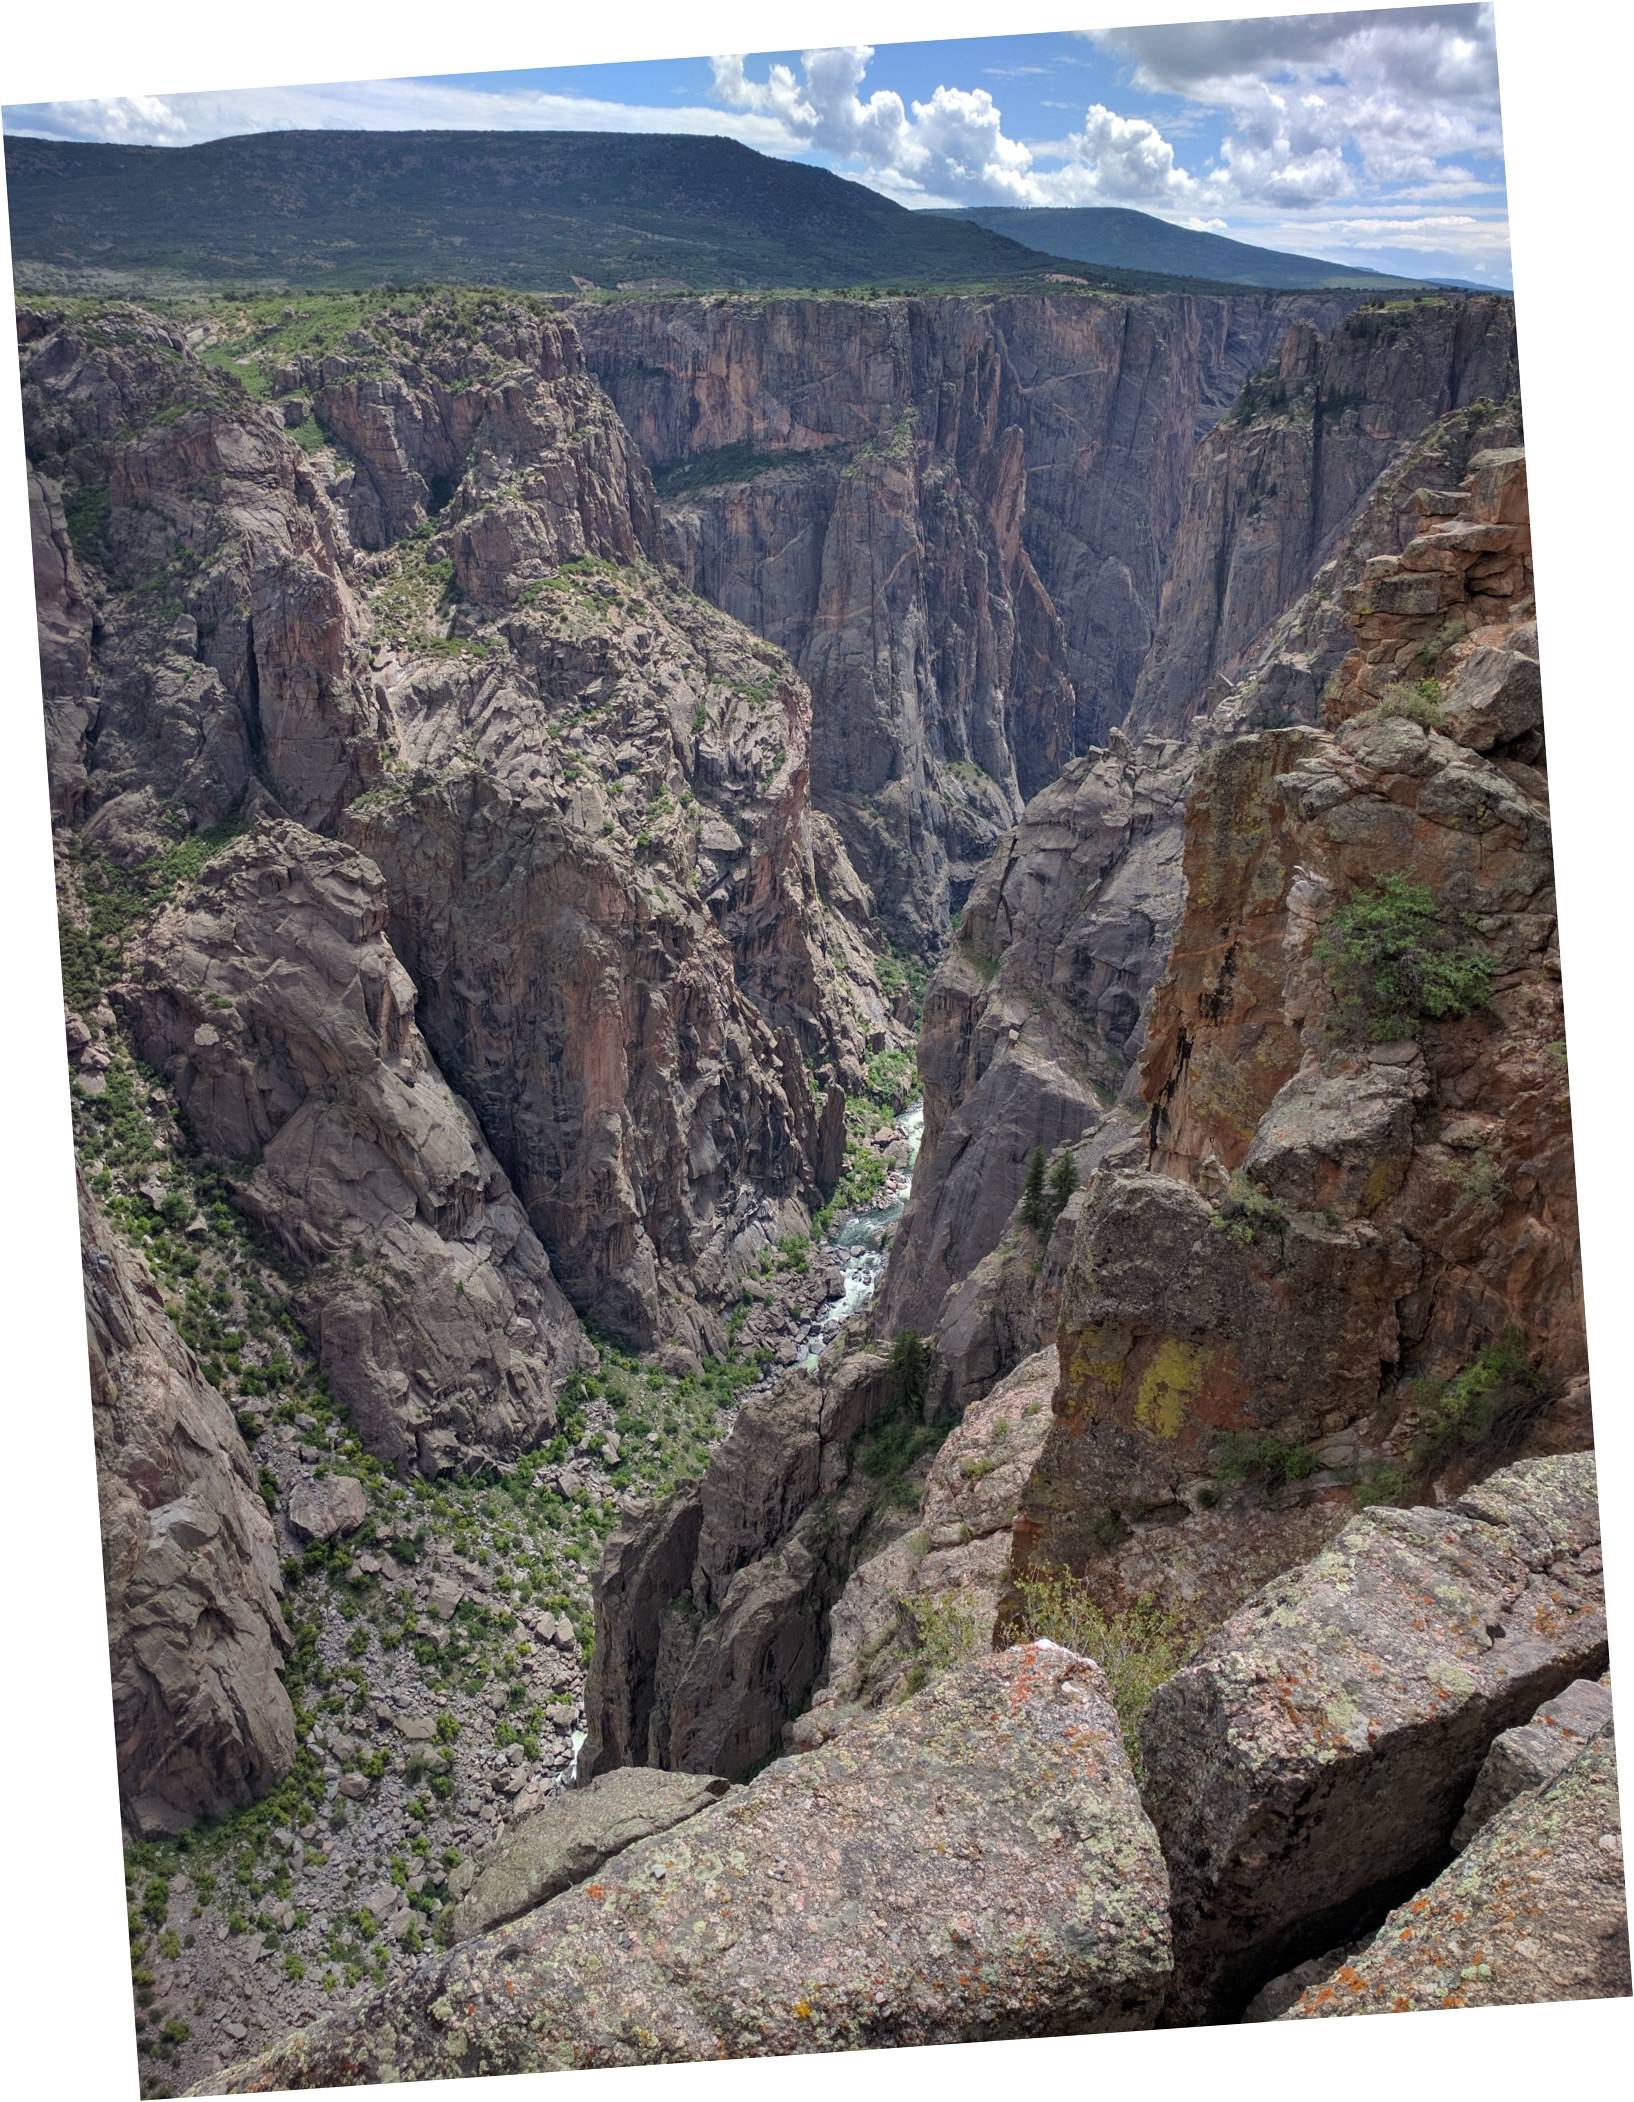 Image: A look into the depths of the Black Canyon from the Cross Fissures View